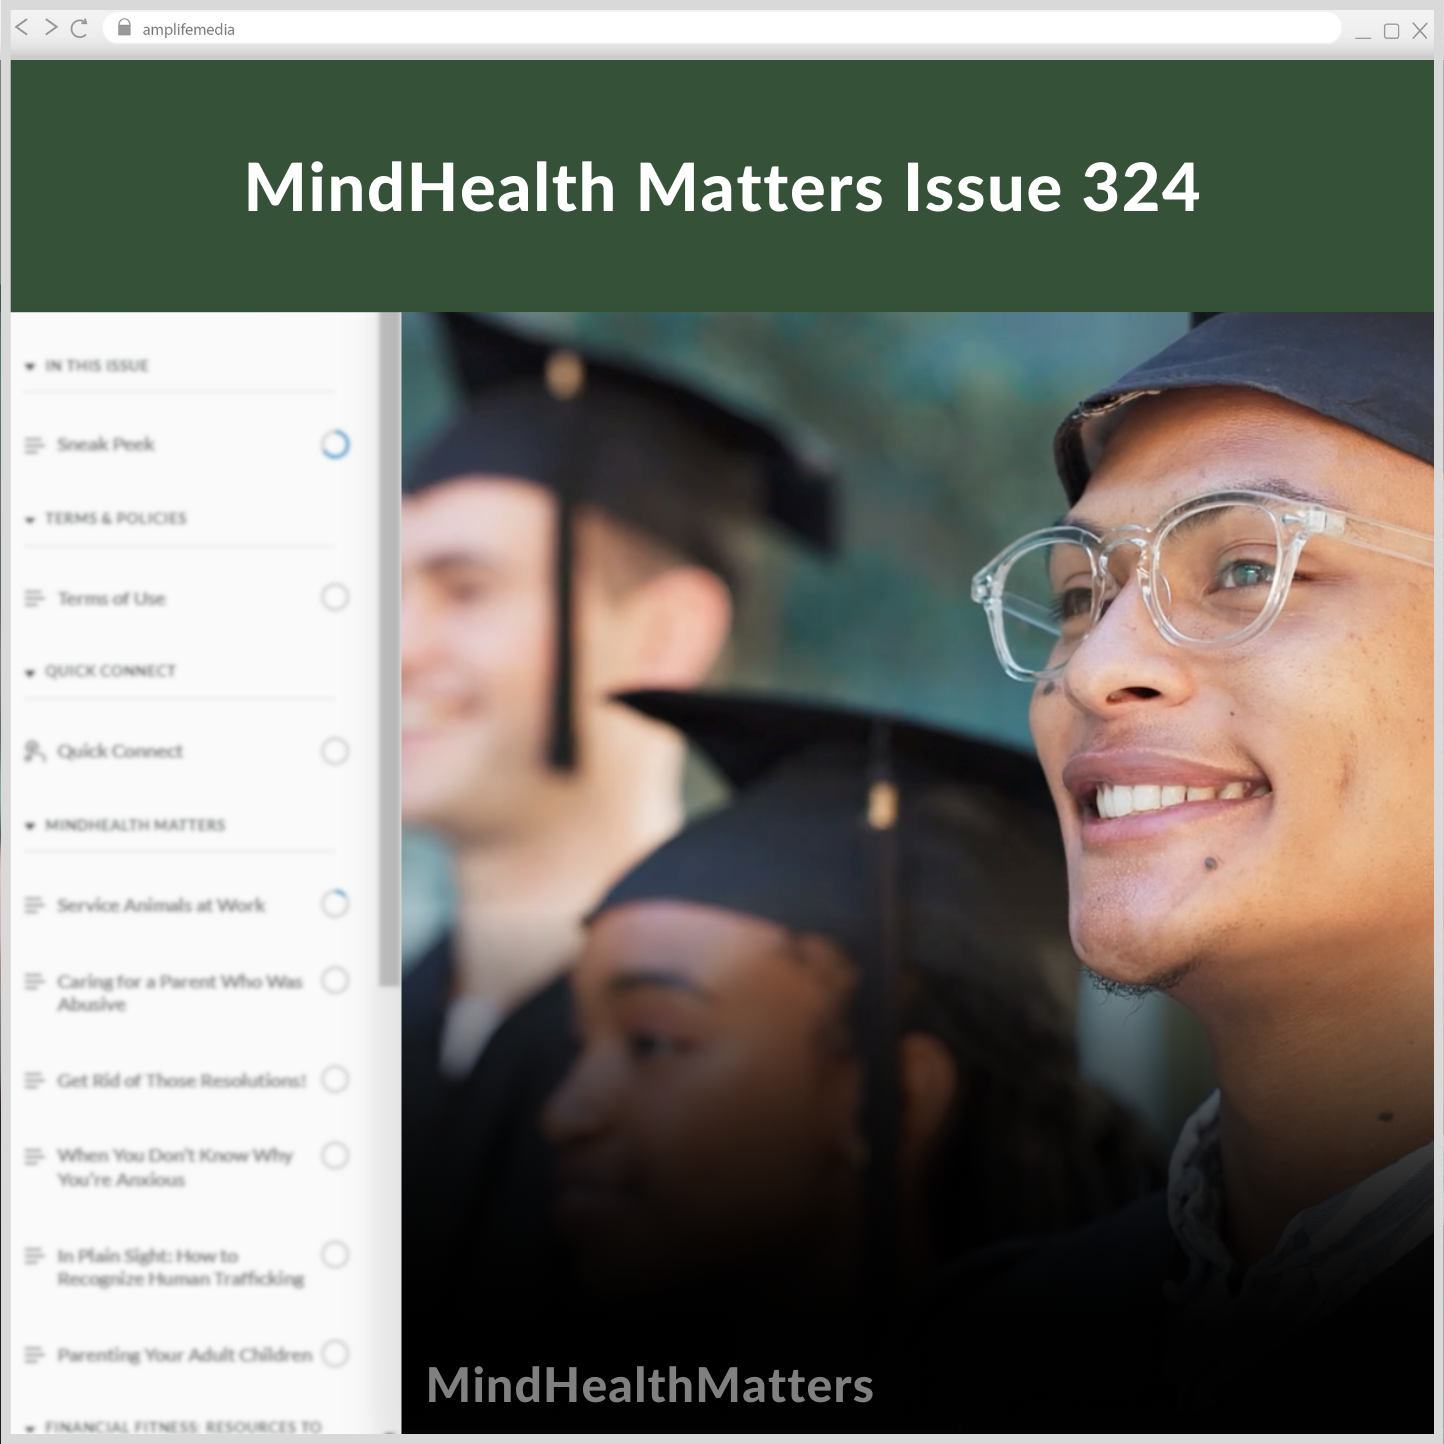 Subscription to Wellbeing Media: MindHealth Matters 324